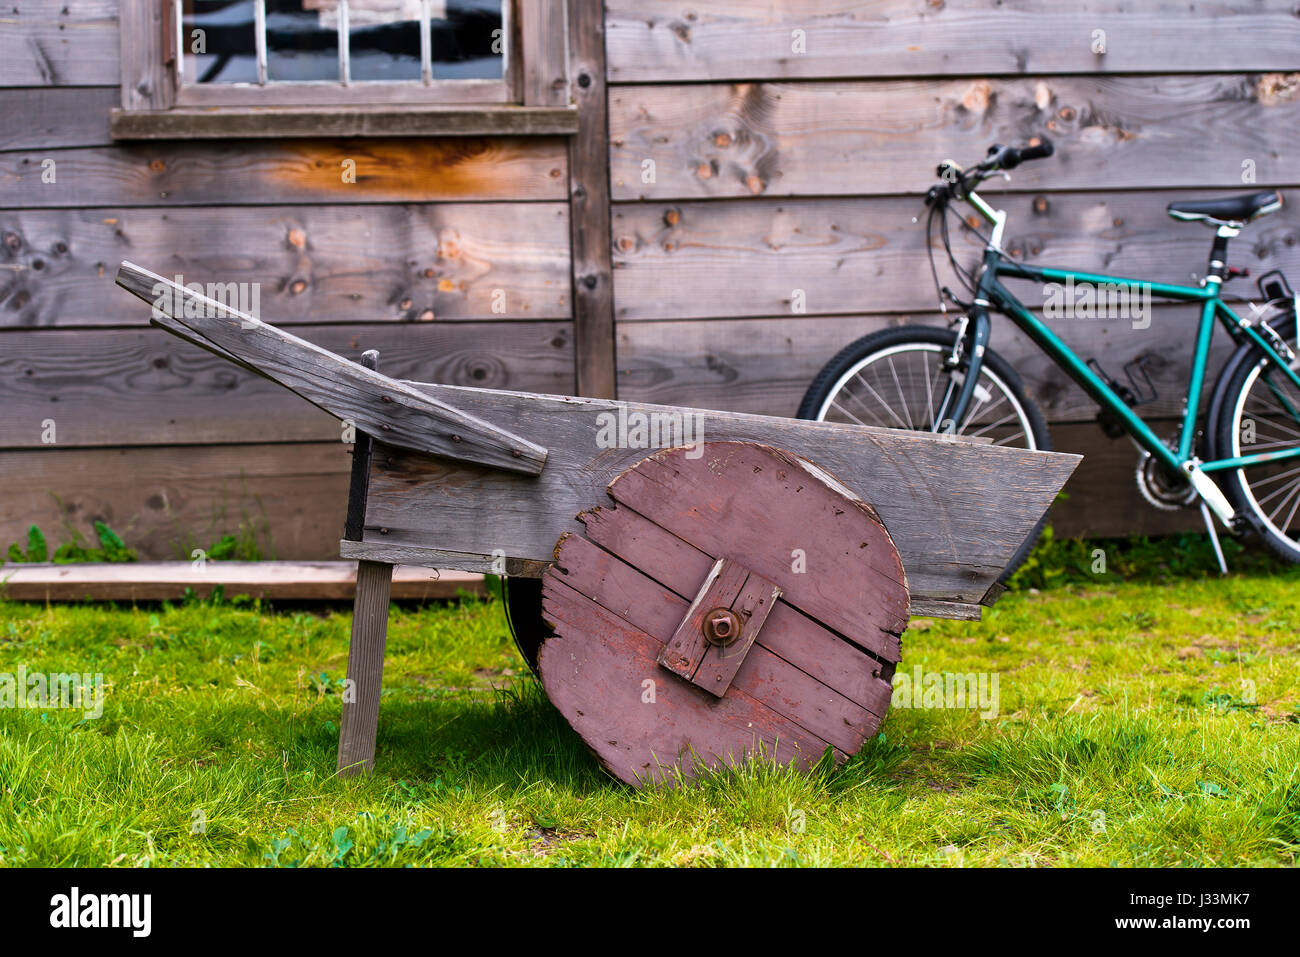 Old wooden wheelbarrow with wooden wheel represents the past and modern design of the bike with green frame standing in old wooden barn Stock Photo